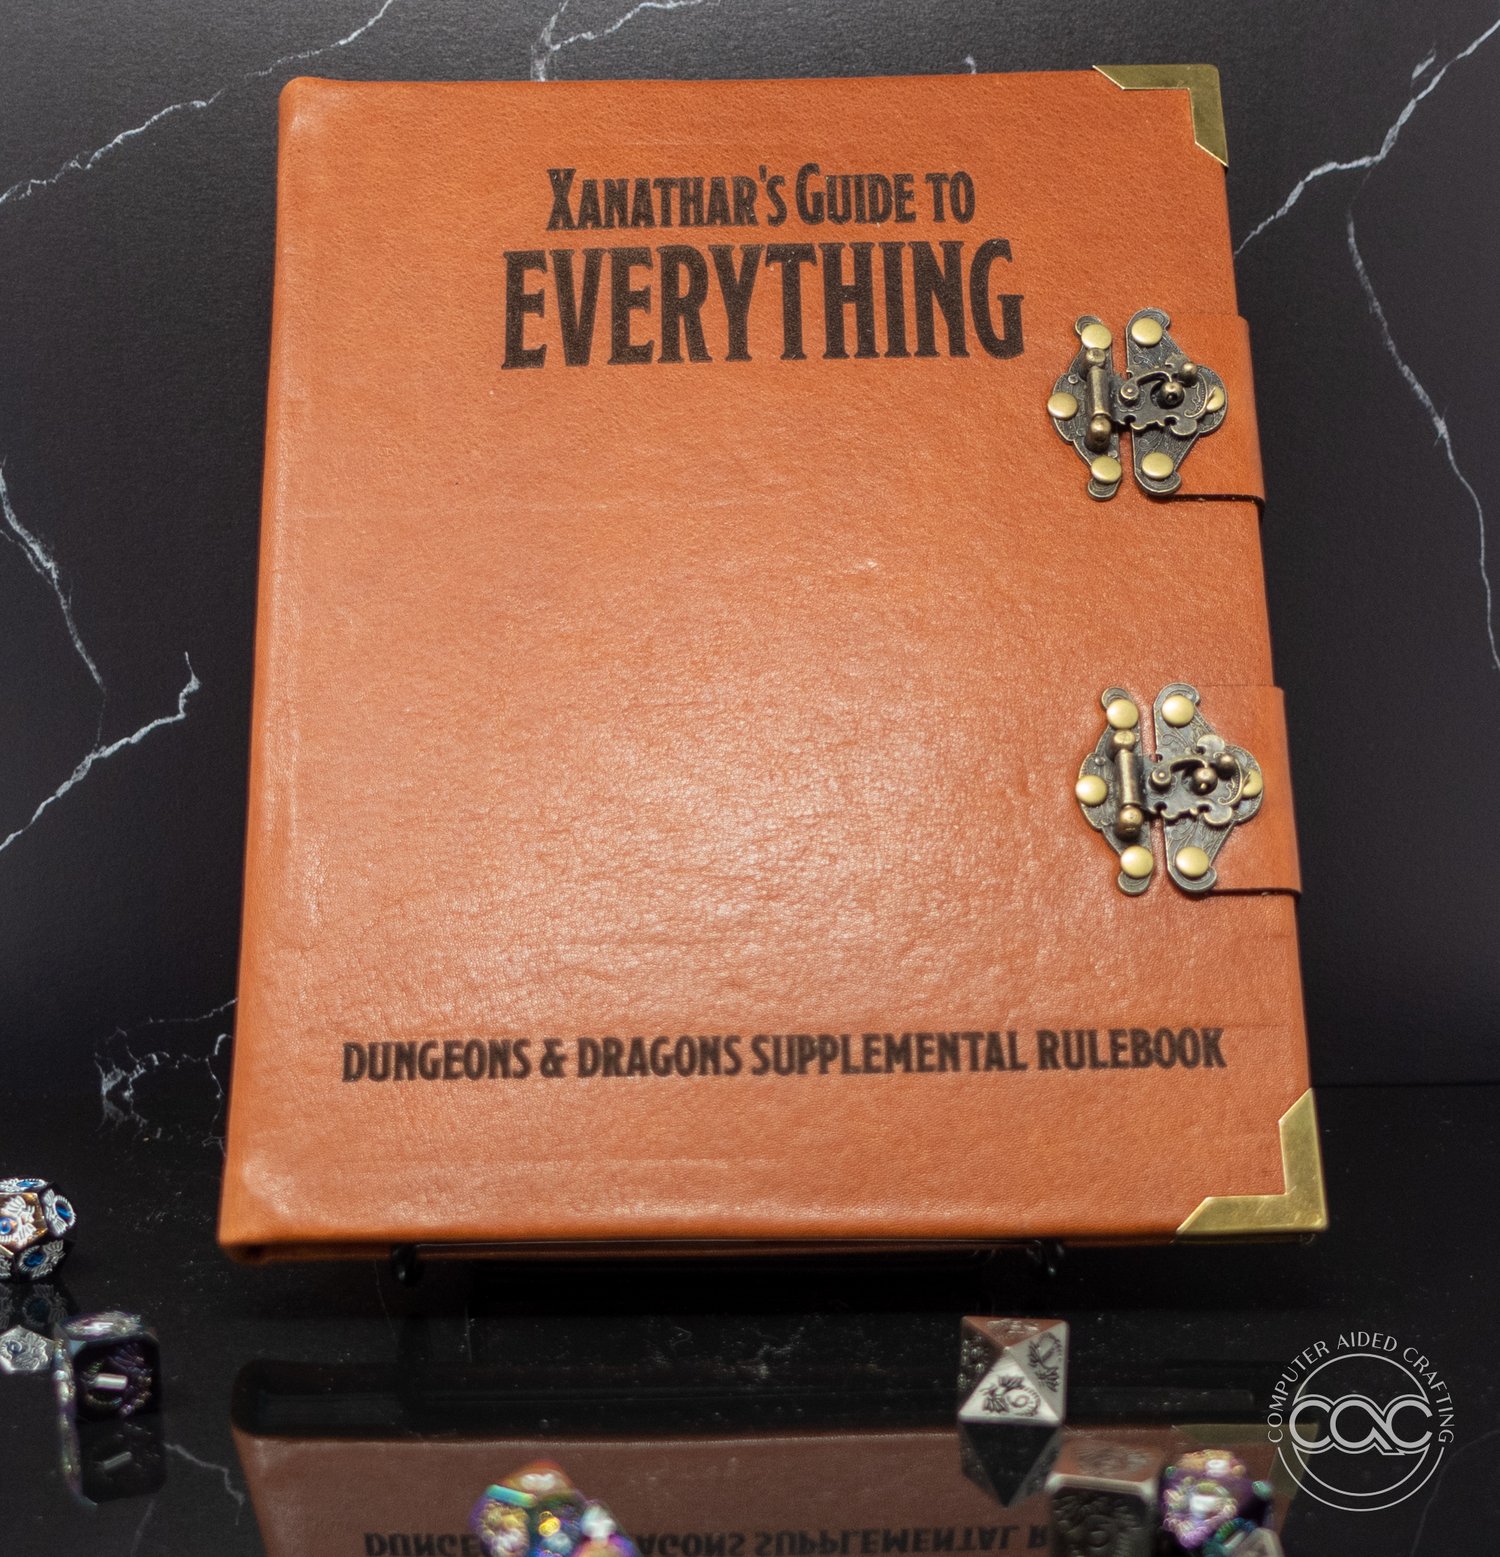 The Book of Many Things: Decidedly Laughable Collection – Open Gaming Store